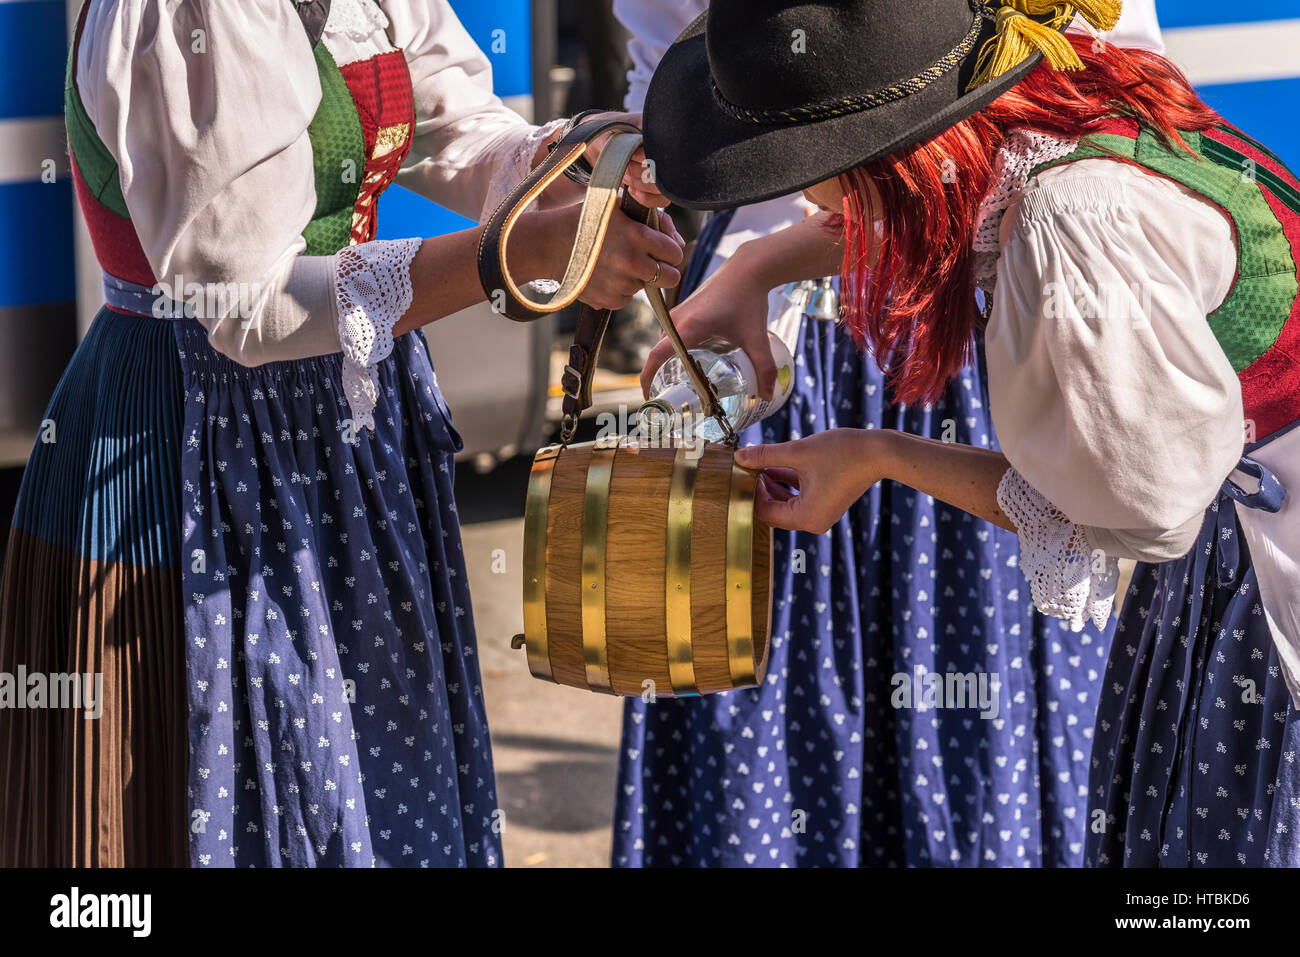 An Austrian women with bright red hair a wearing a dirndl pours Schnapps into a small keg with shoulder strap in Vienna. Stock Photo